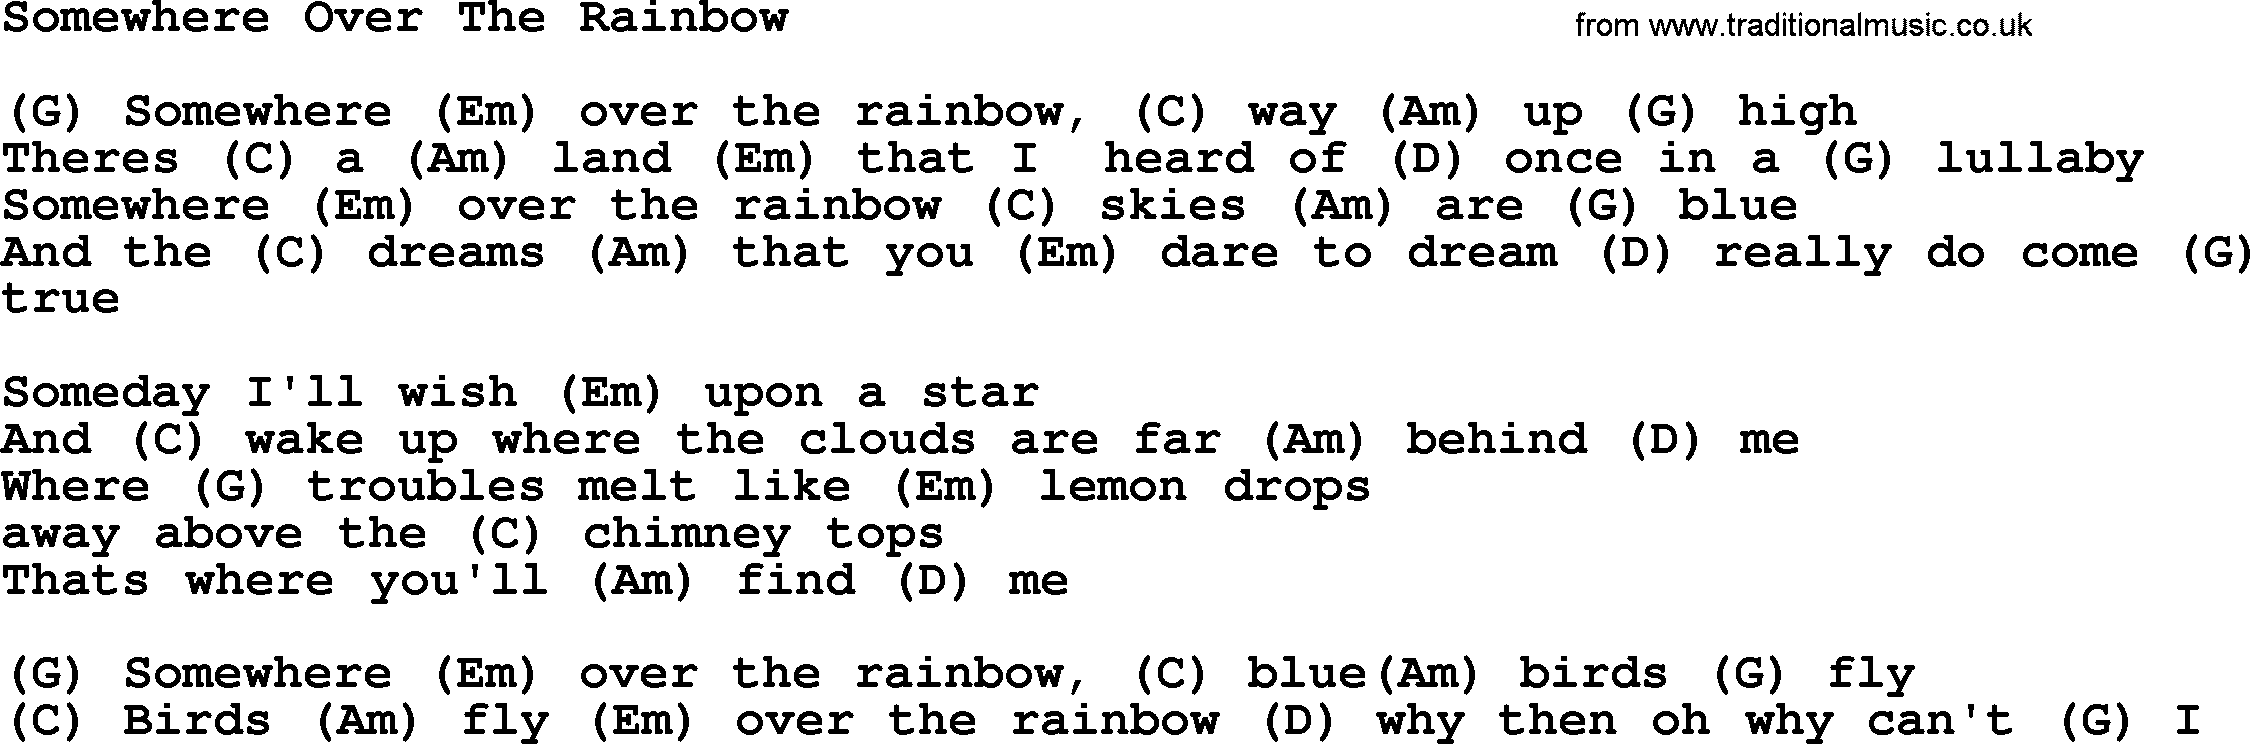 Willie Nelson song: Somewhere Over The Rainbow, lyrics and chords